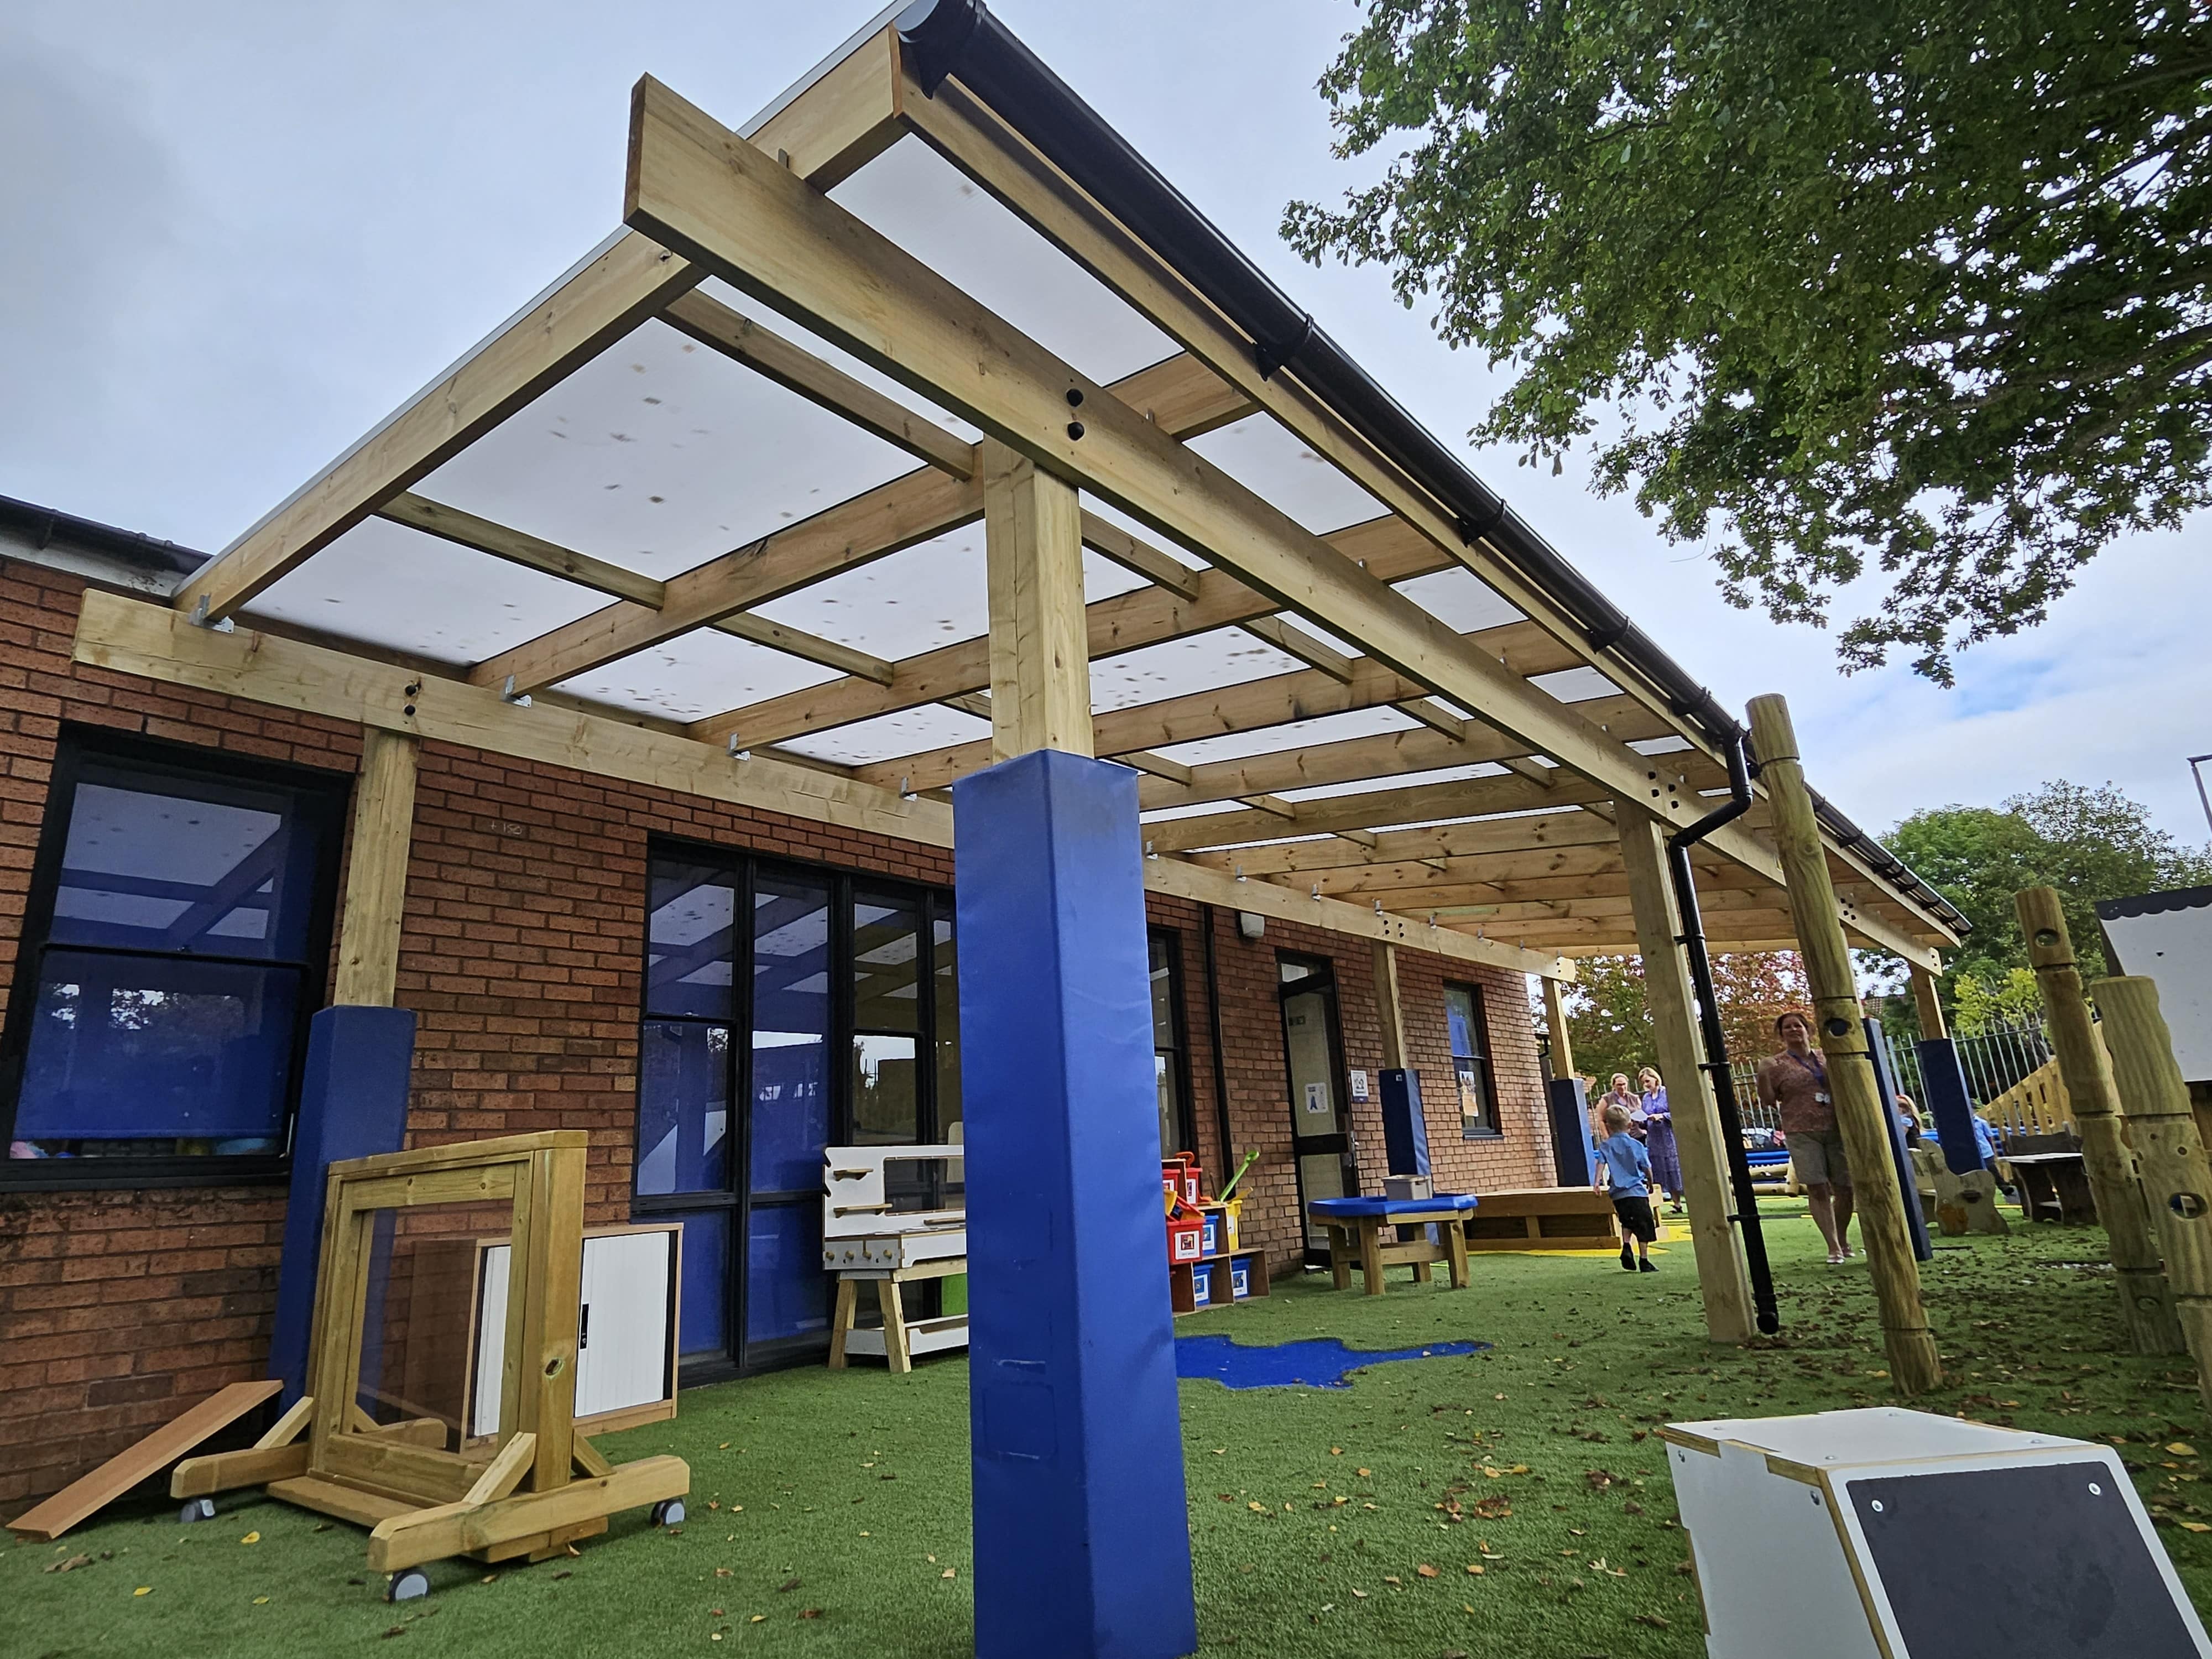 A freestanding timber canopy attached to the school. Underneath the canopy is a wide variety of different play equipment, designed to help children develop their skills. The flooring is Playturf Artificial Grass.